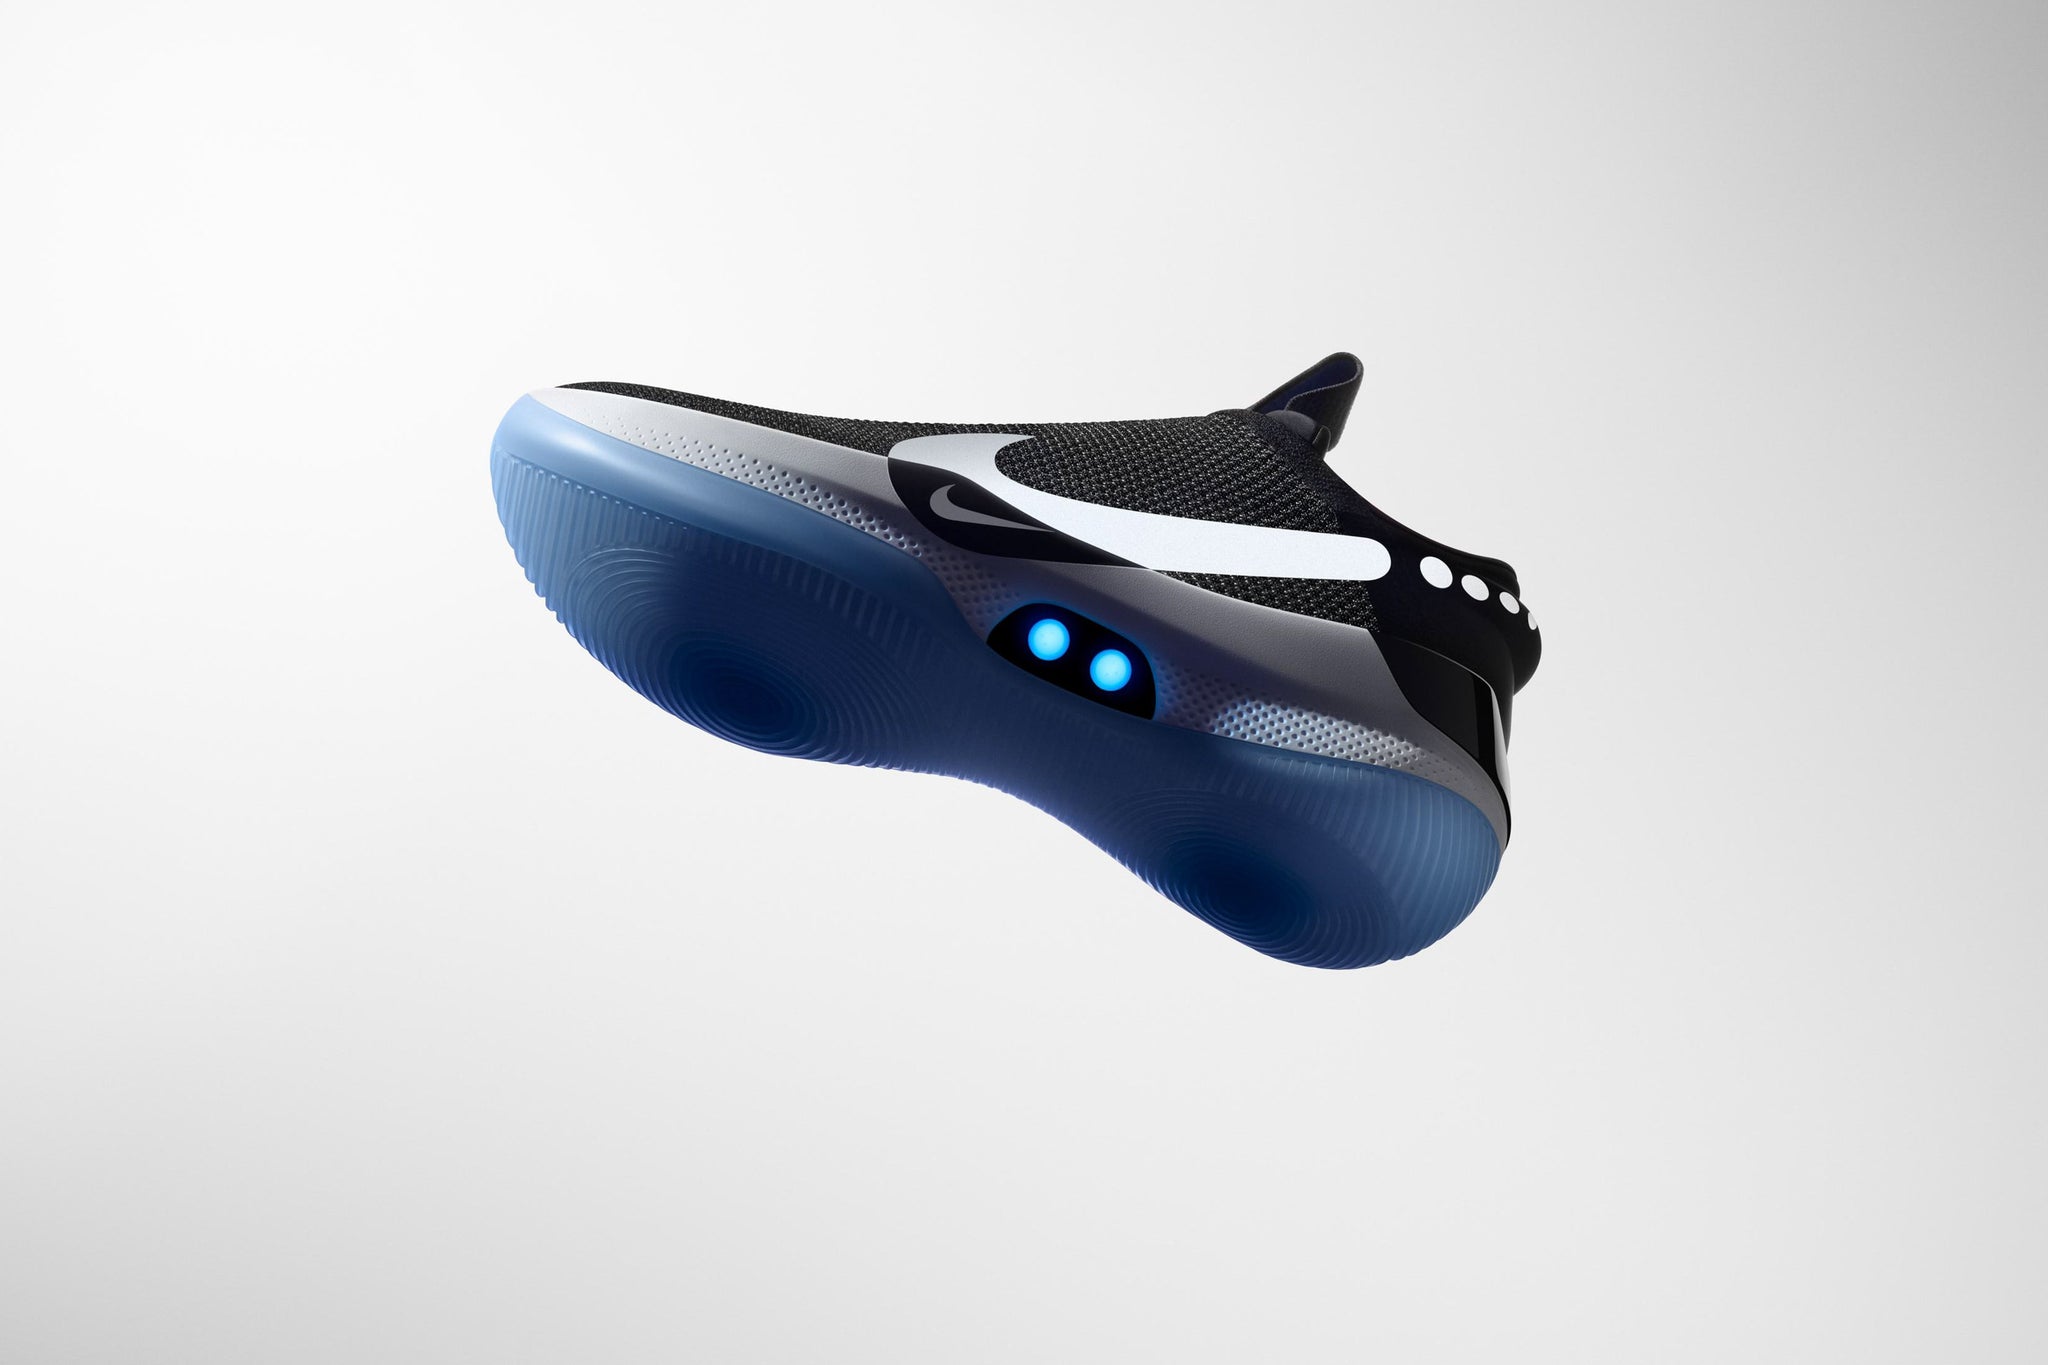 nike adapt bb future of the game